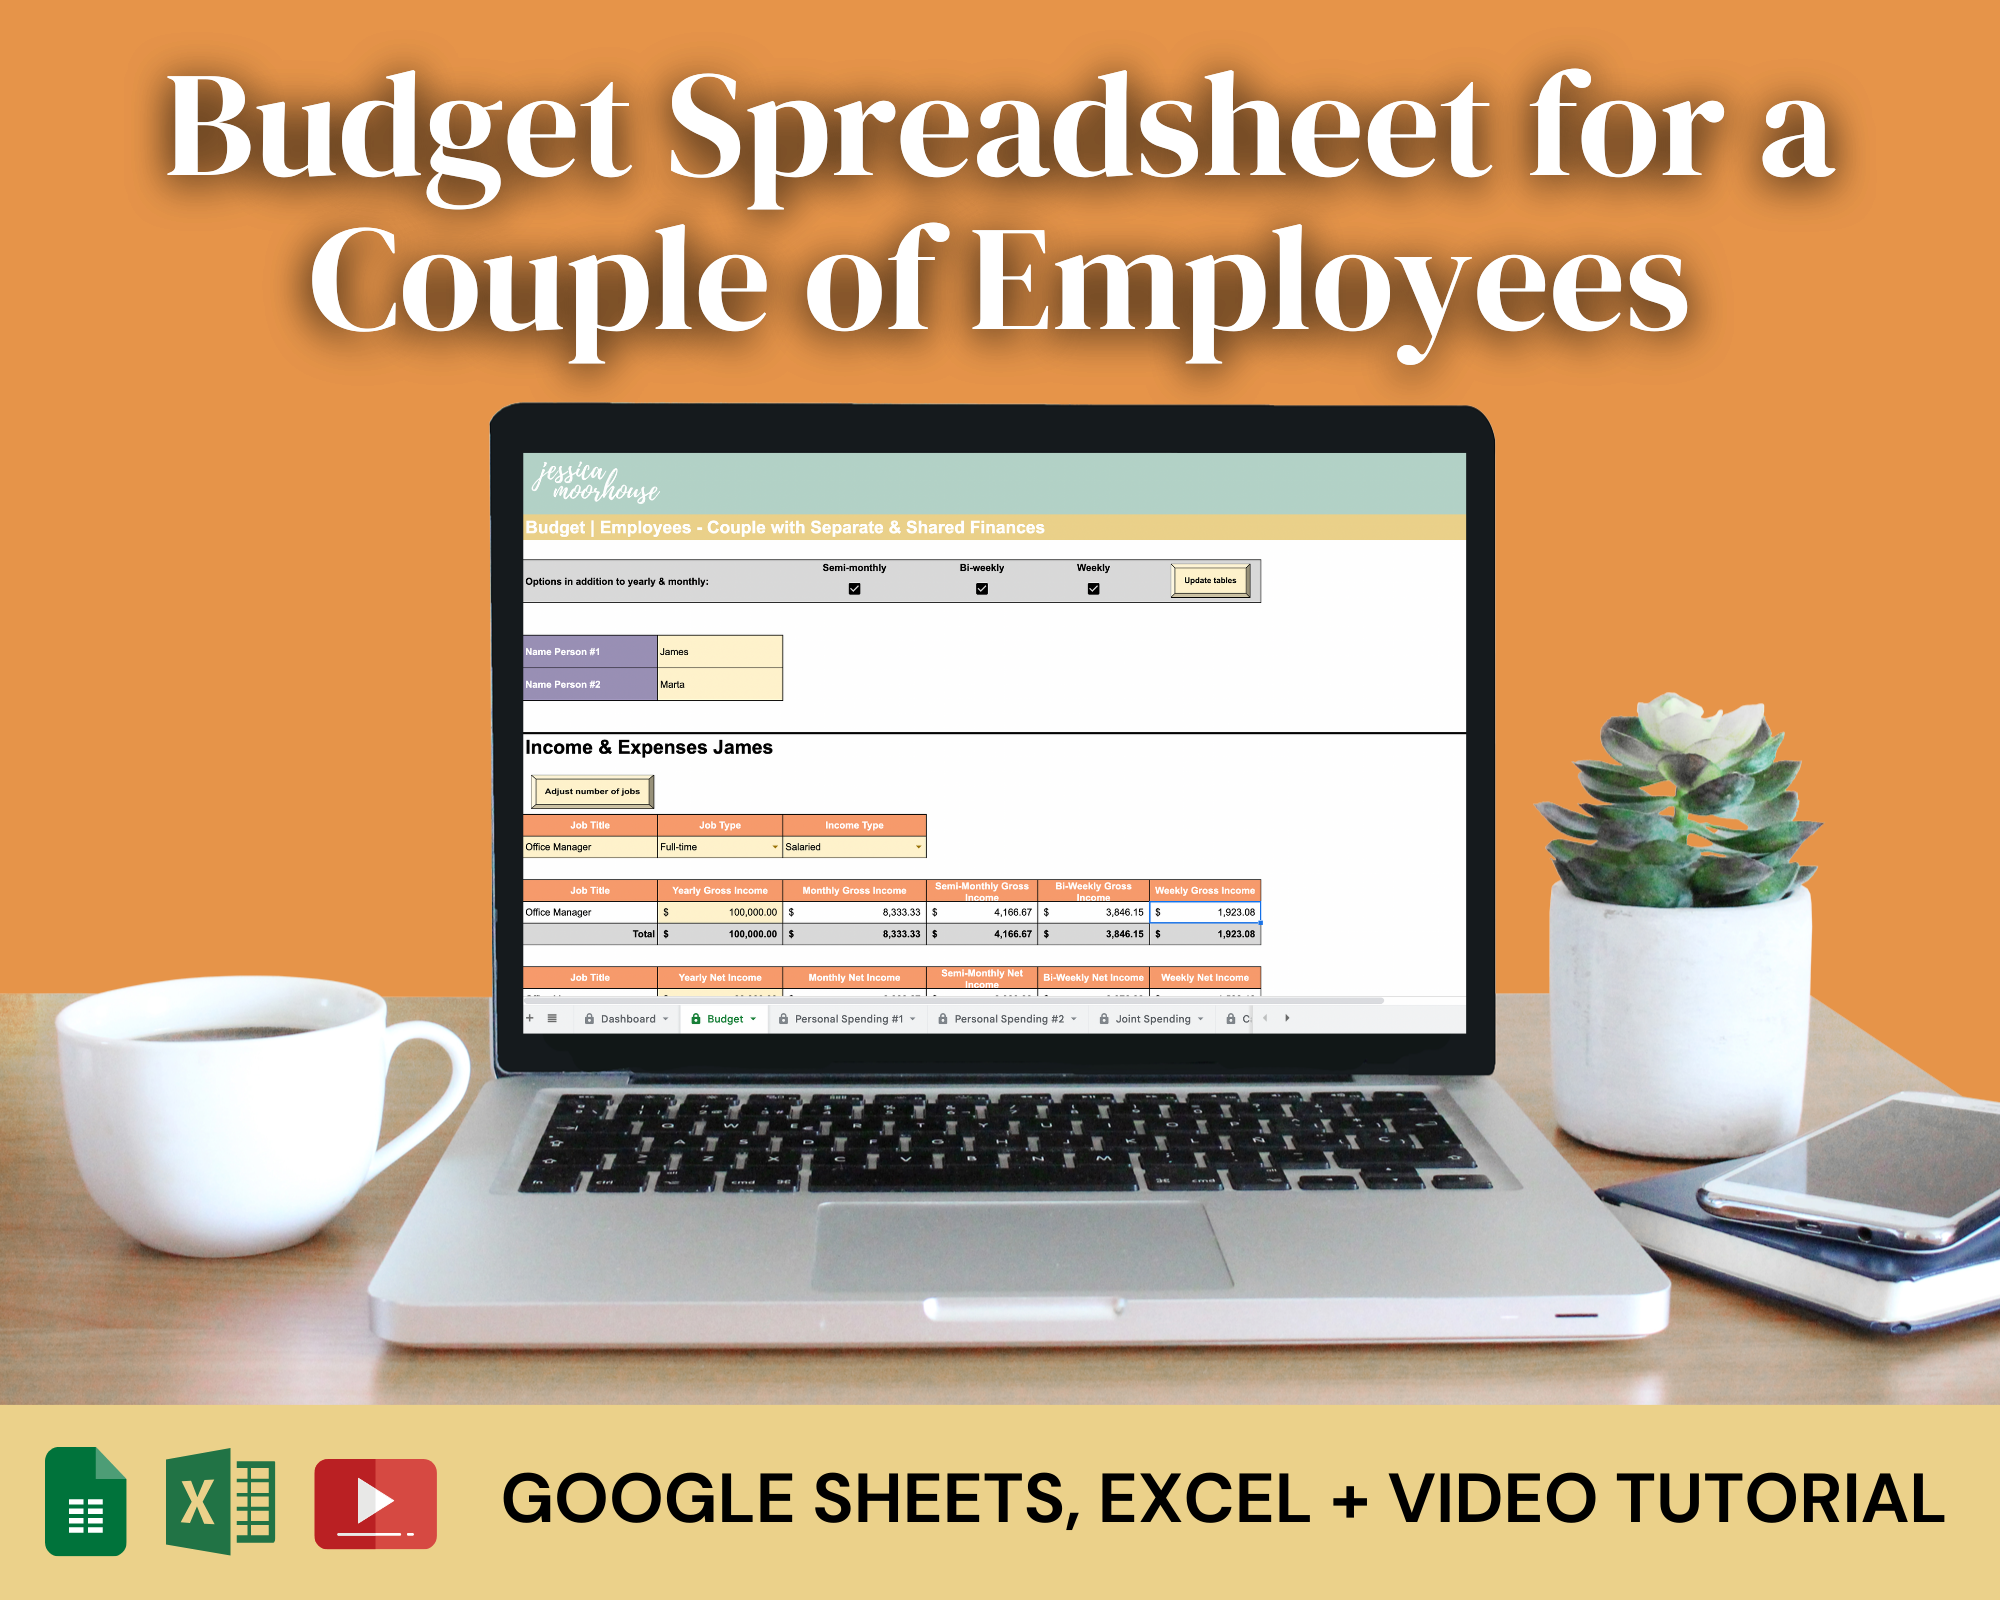 Budget Spreadsheet | Employees - Couple with Separate & Shared Finances